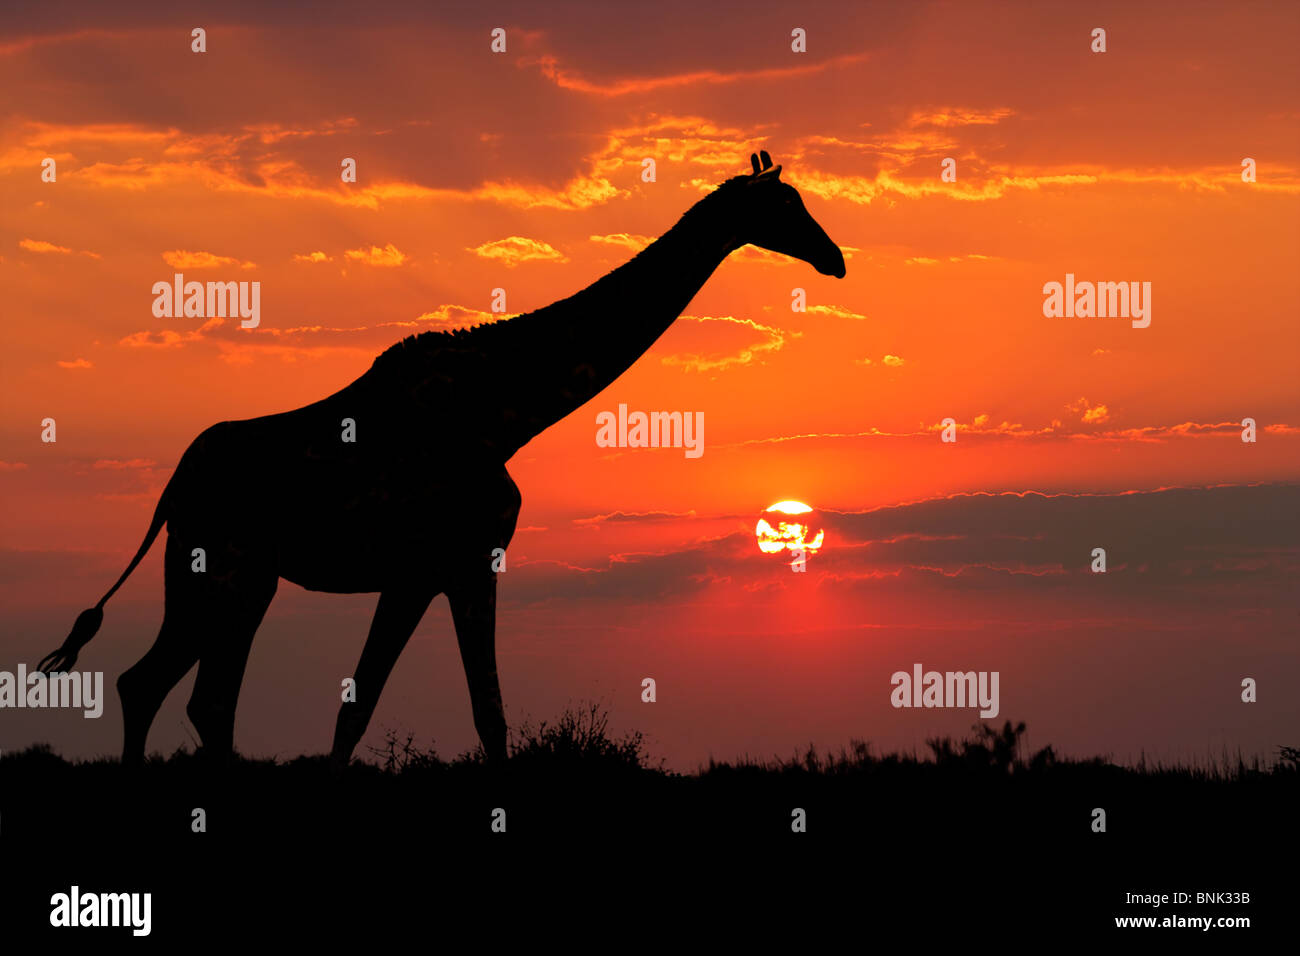 A giraffe silhouetted against a dramatic sunset with clouds, South Africa Stock Photo